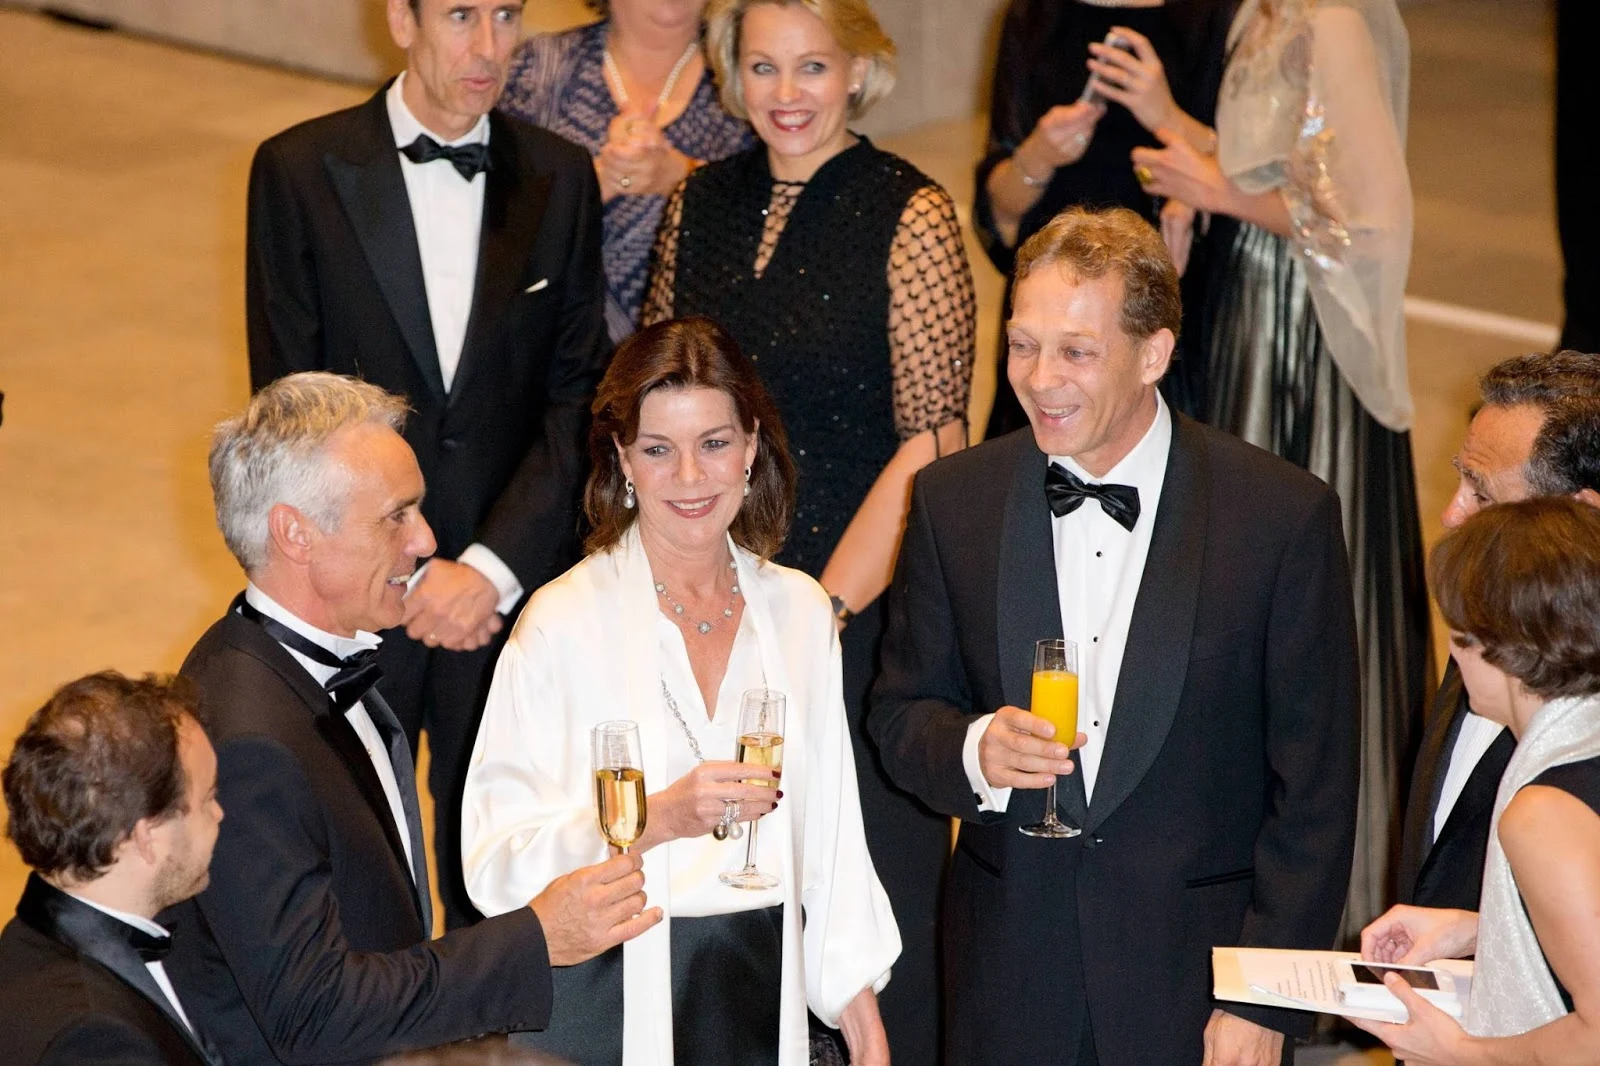 Princess Caroline of Monaco attends a charity evening at the Rijksmuseum in Amsterdam